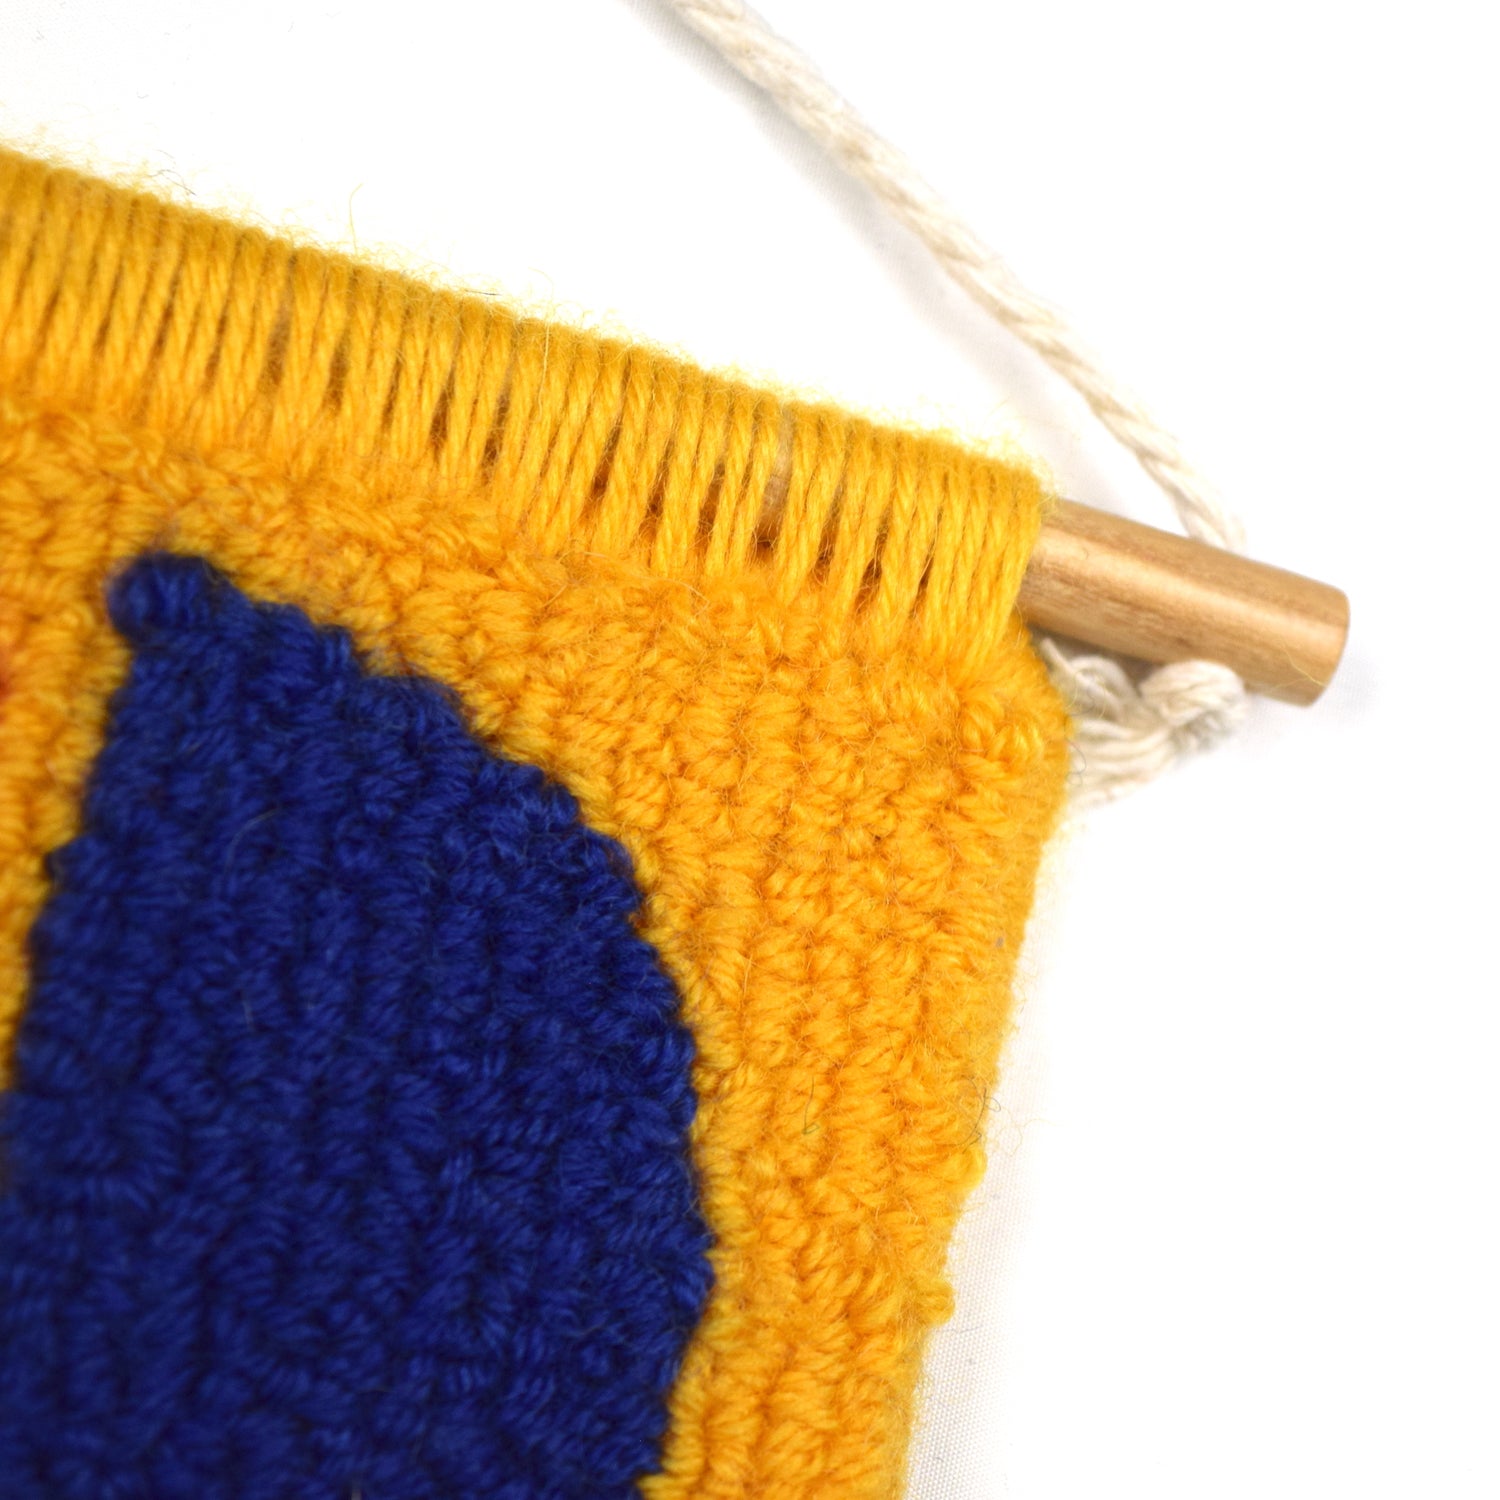 A contemporary hand punched miniature Wall Hanging, in bright yellow, royal blue and coral accents. Using simple shapes and colour. Using British Wool close up.